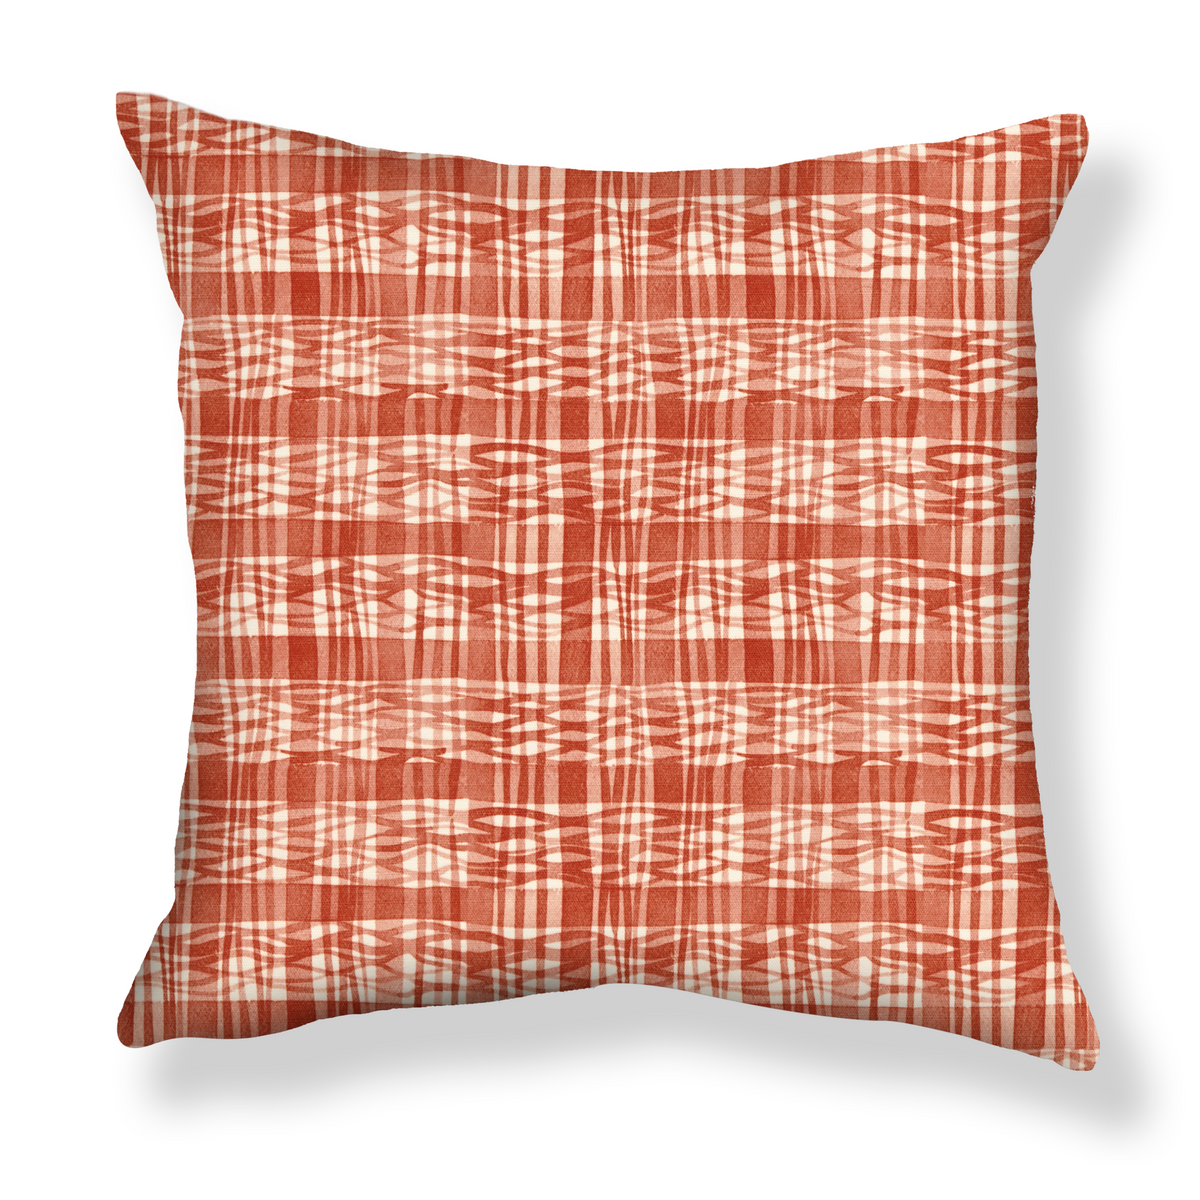 Thatched Pillow in Tomato